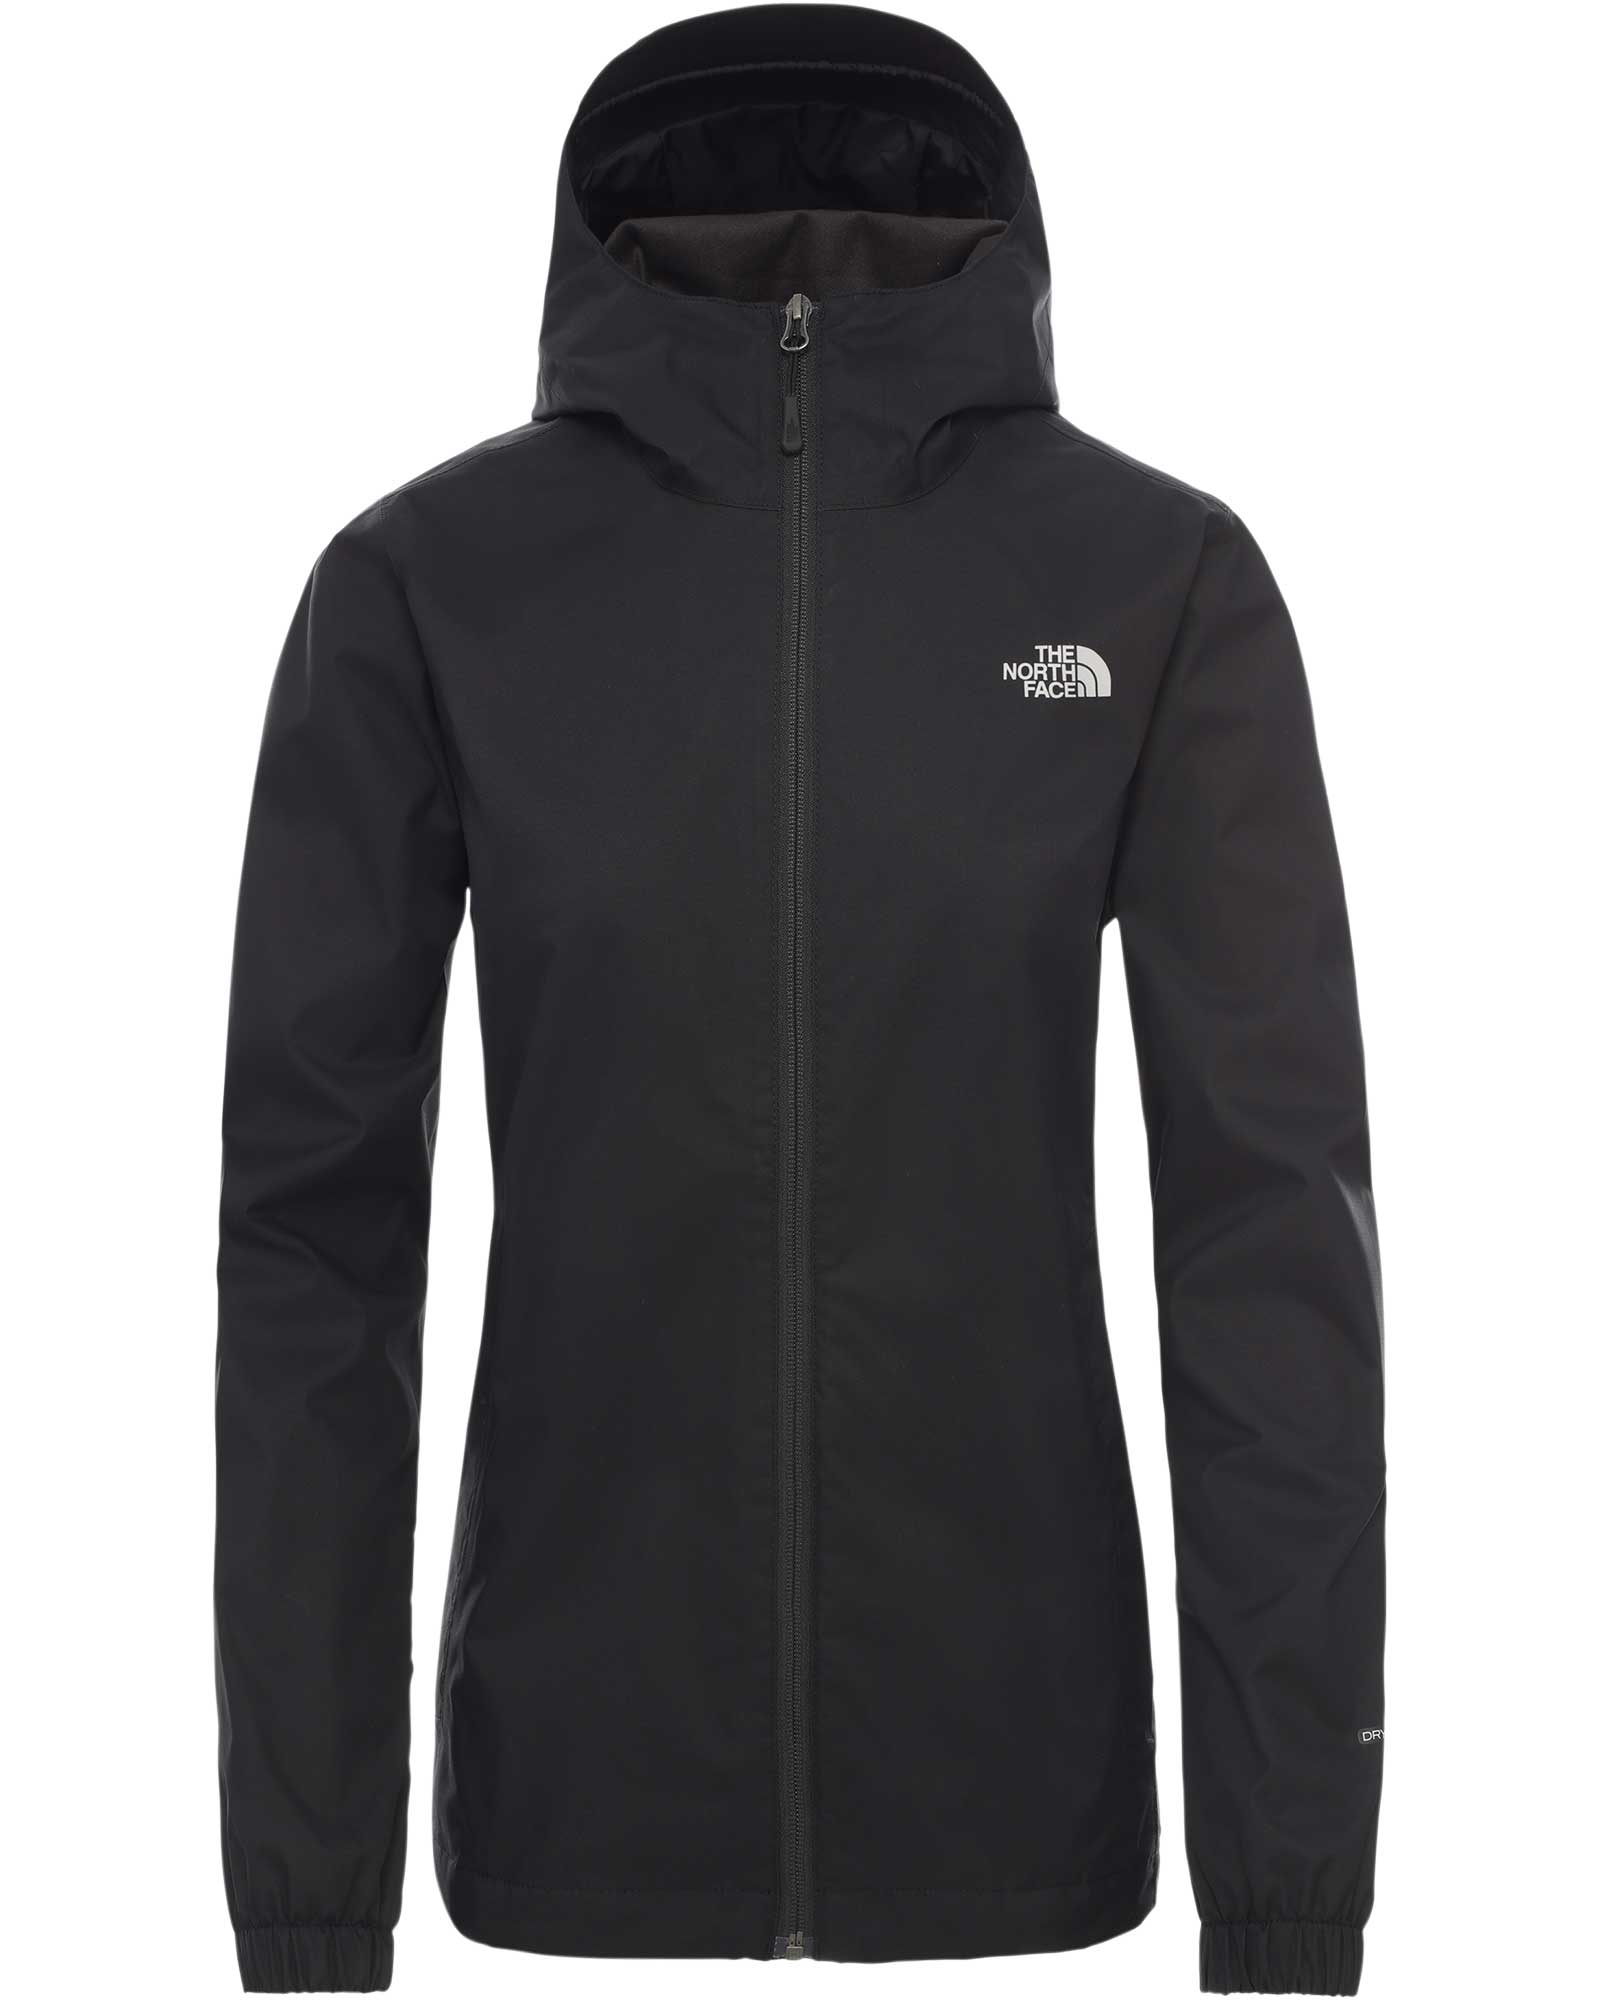 The North Face Quest DryVent Women’s Jacket - TNF Black-Foil Grey S